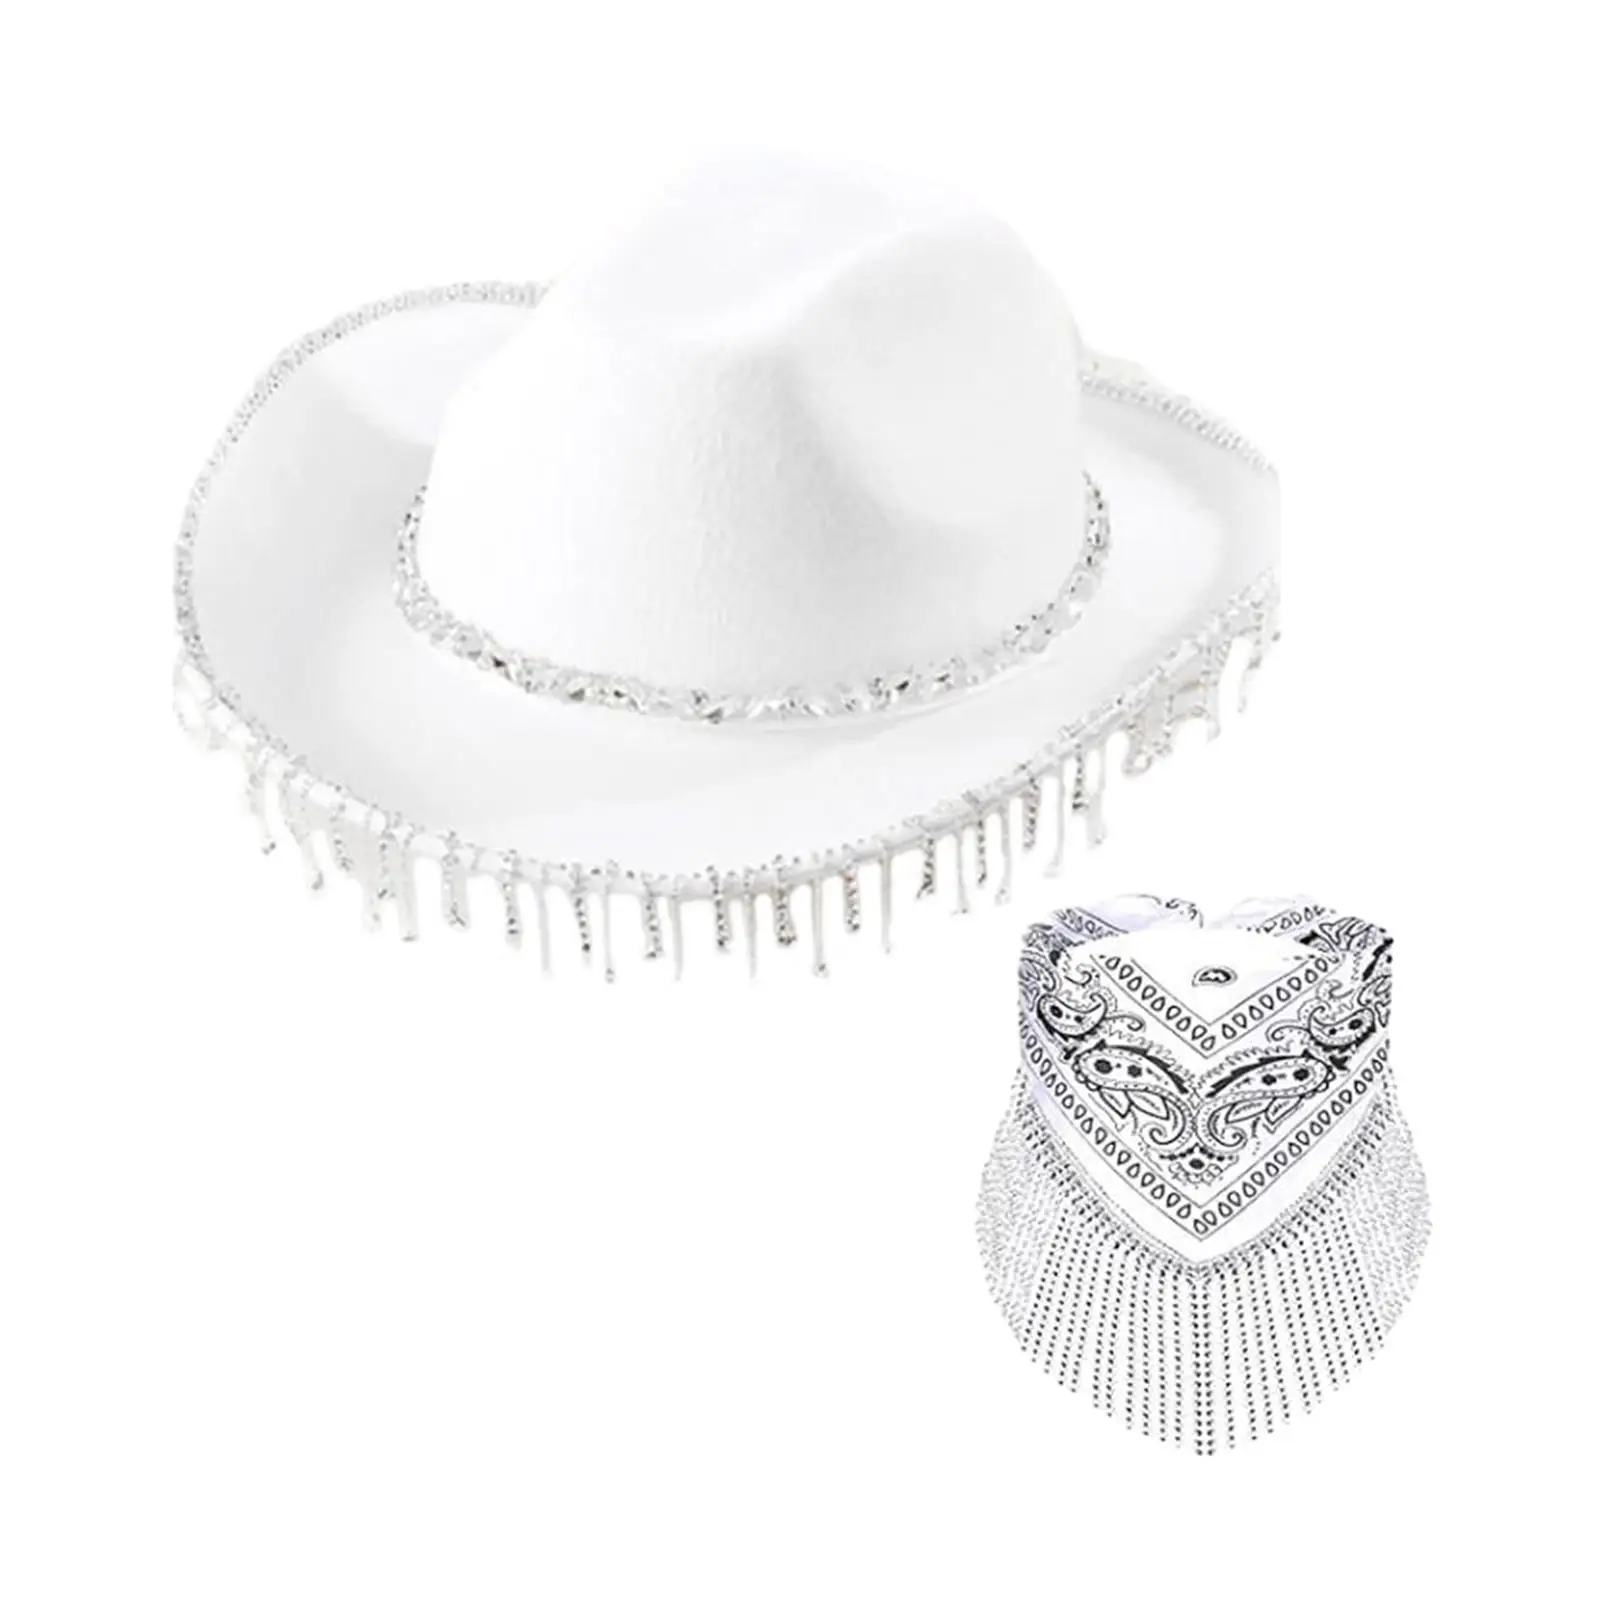 Western Cowgirl Hat Cowboy Hat with Fringed Bandana Set for Women Ladies Girls Outdoor Wedding Photo Props Costume Accessories